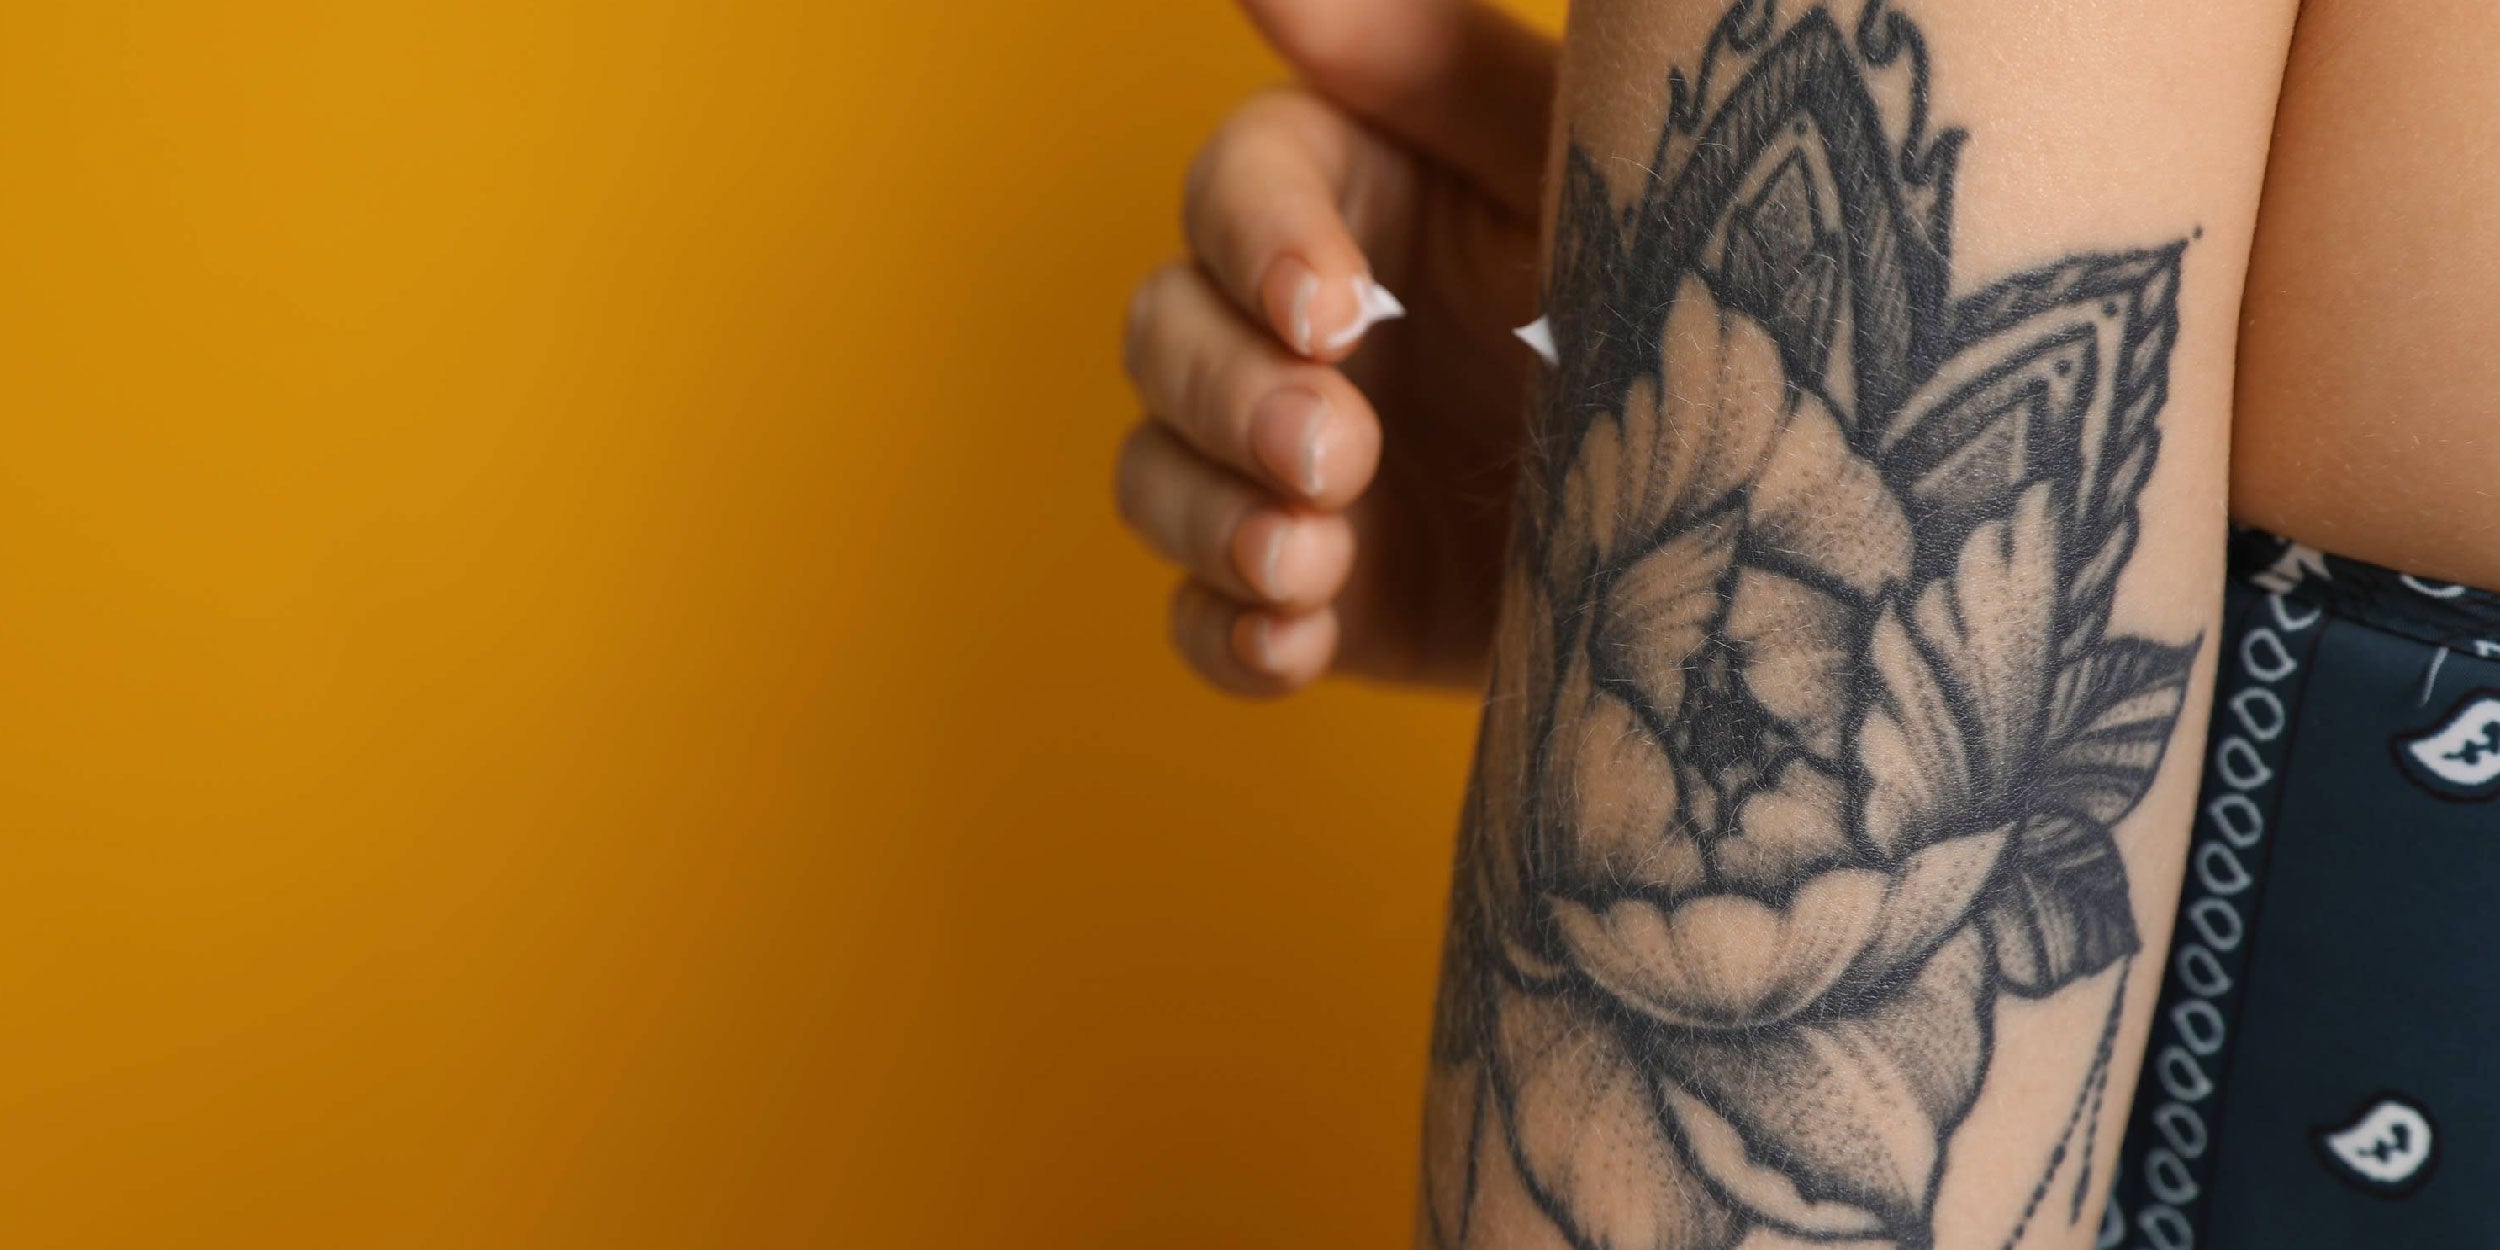 How to Look After a New Tattoo: 5 Top Tips